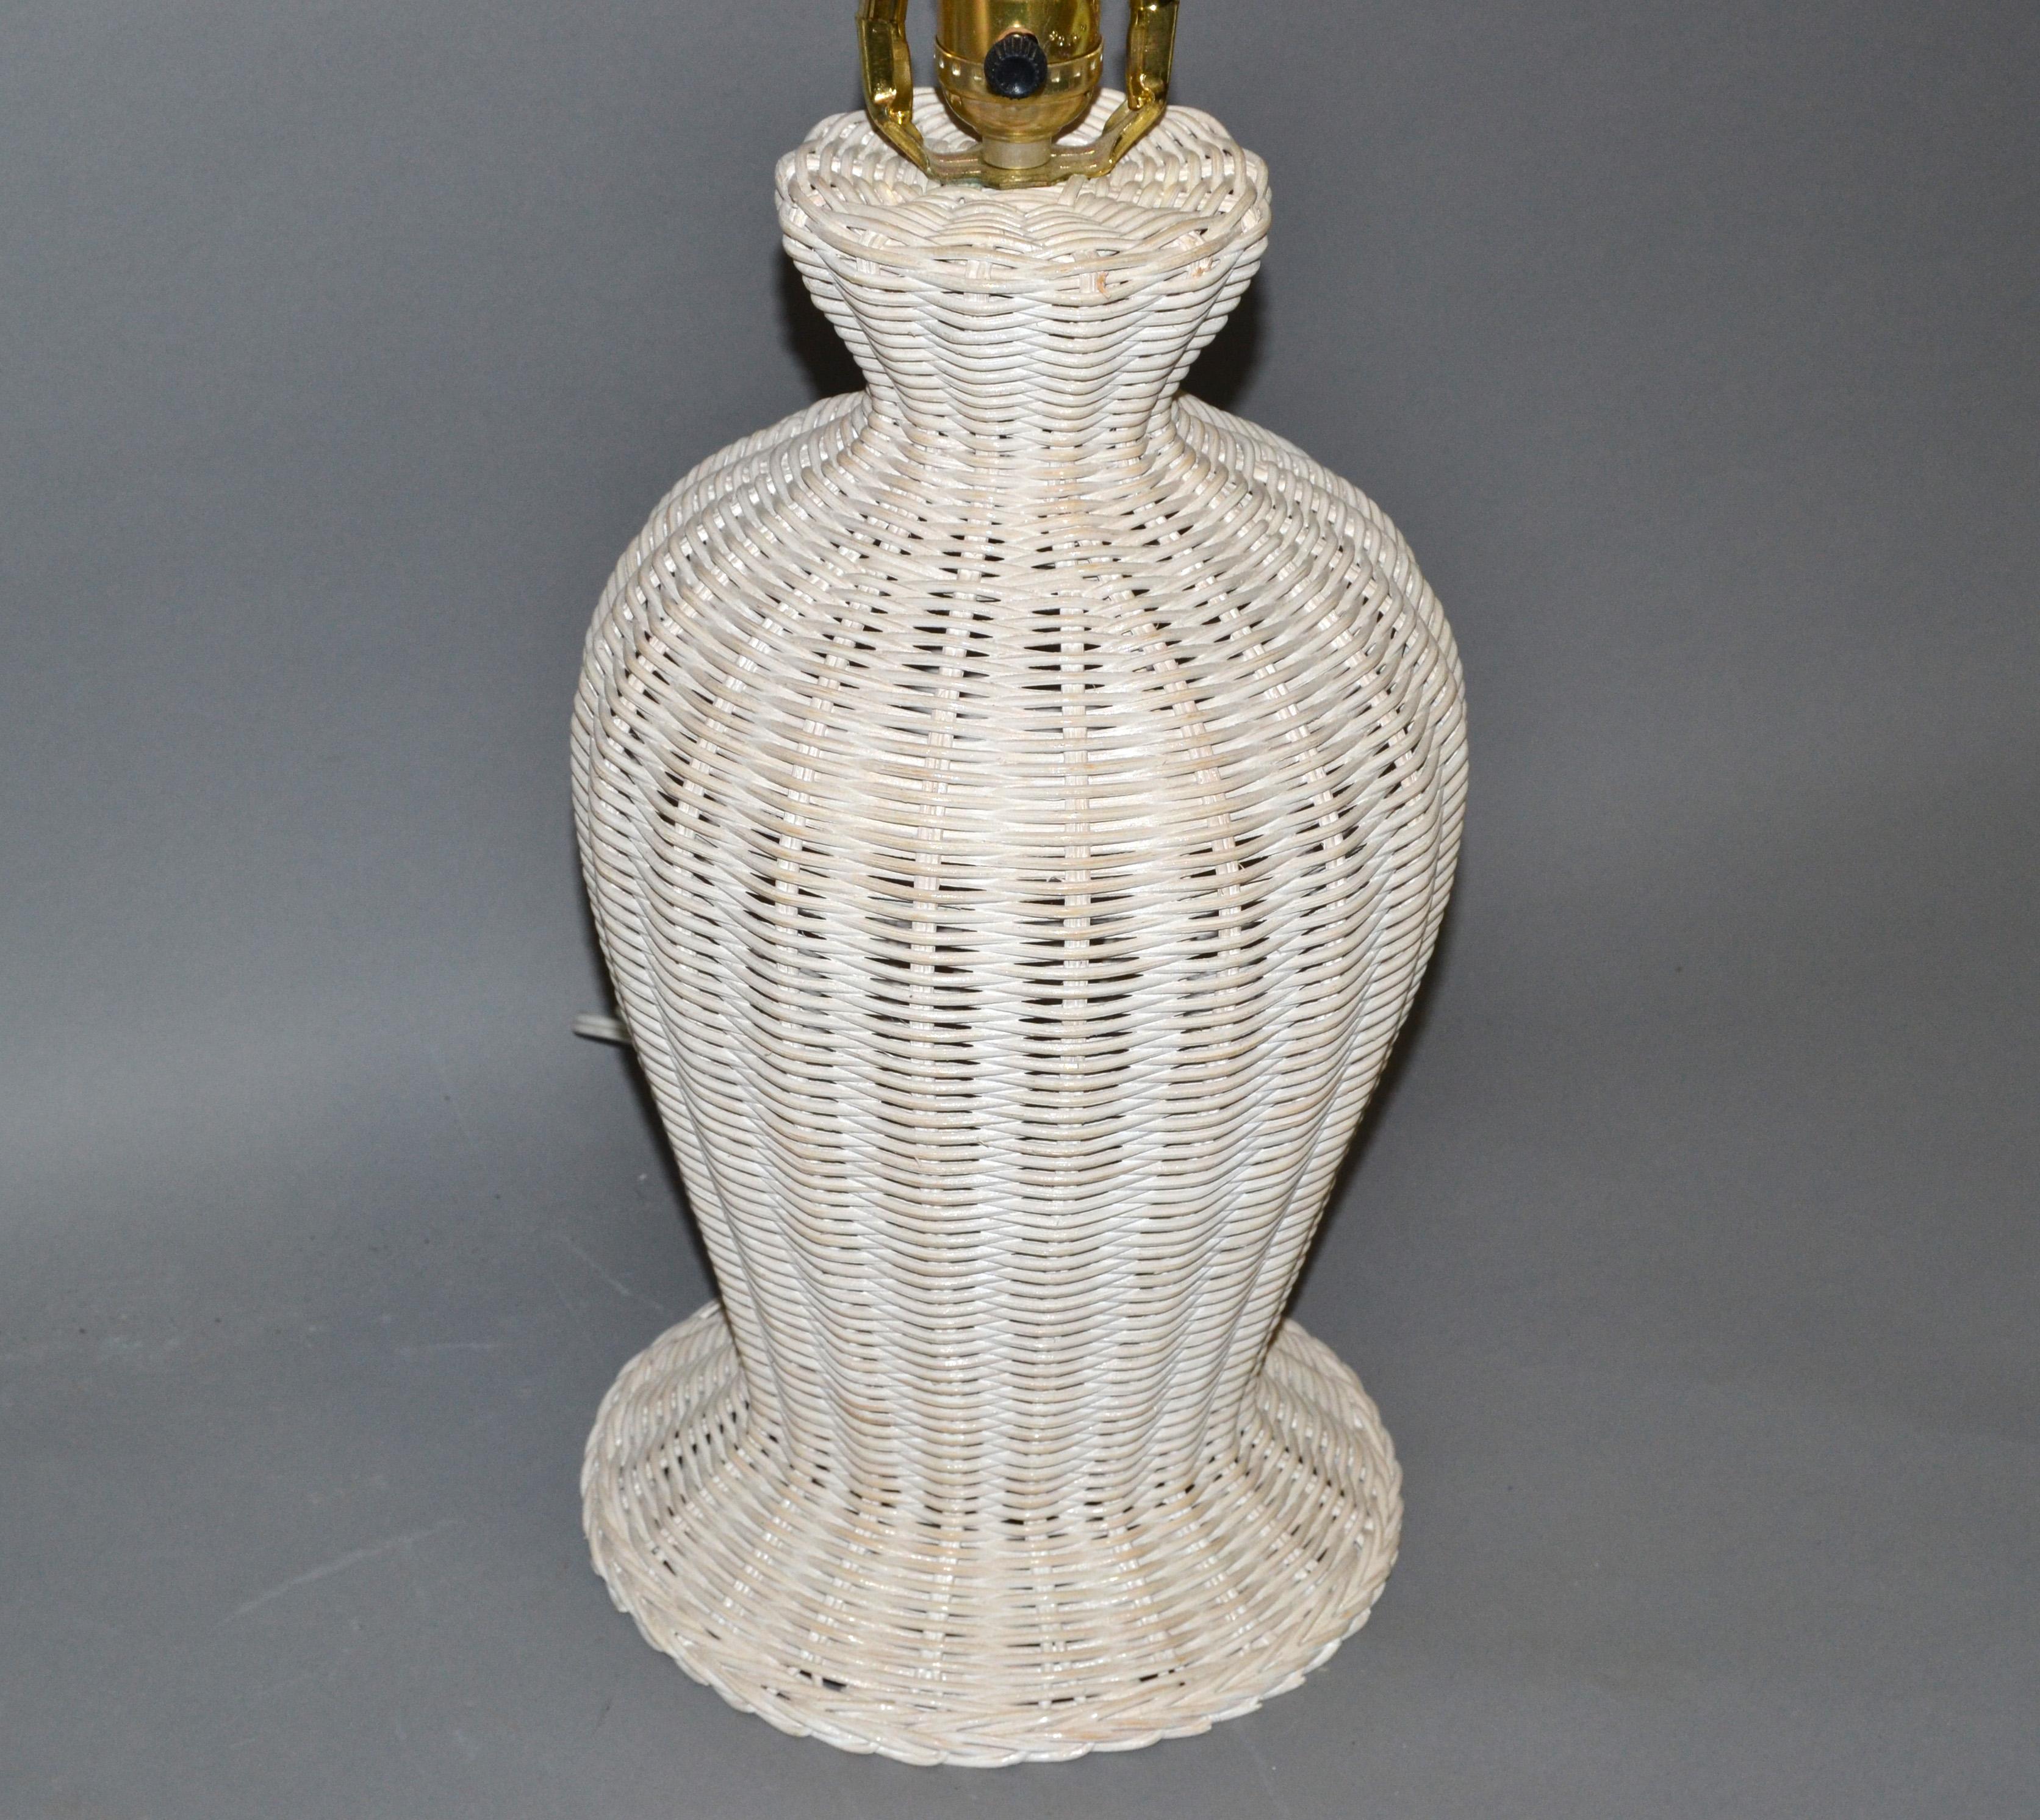 2 Hollywood Regency Vintage White Bleached Handwoven Wicker & Beaded Table Lamp In Good Condition For Sale In Miami, FL